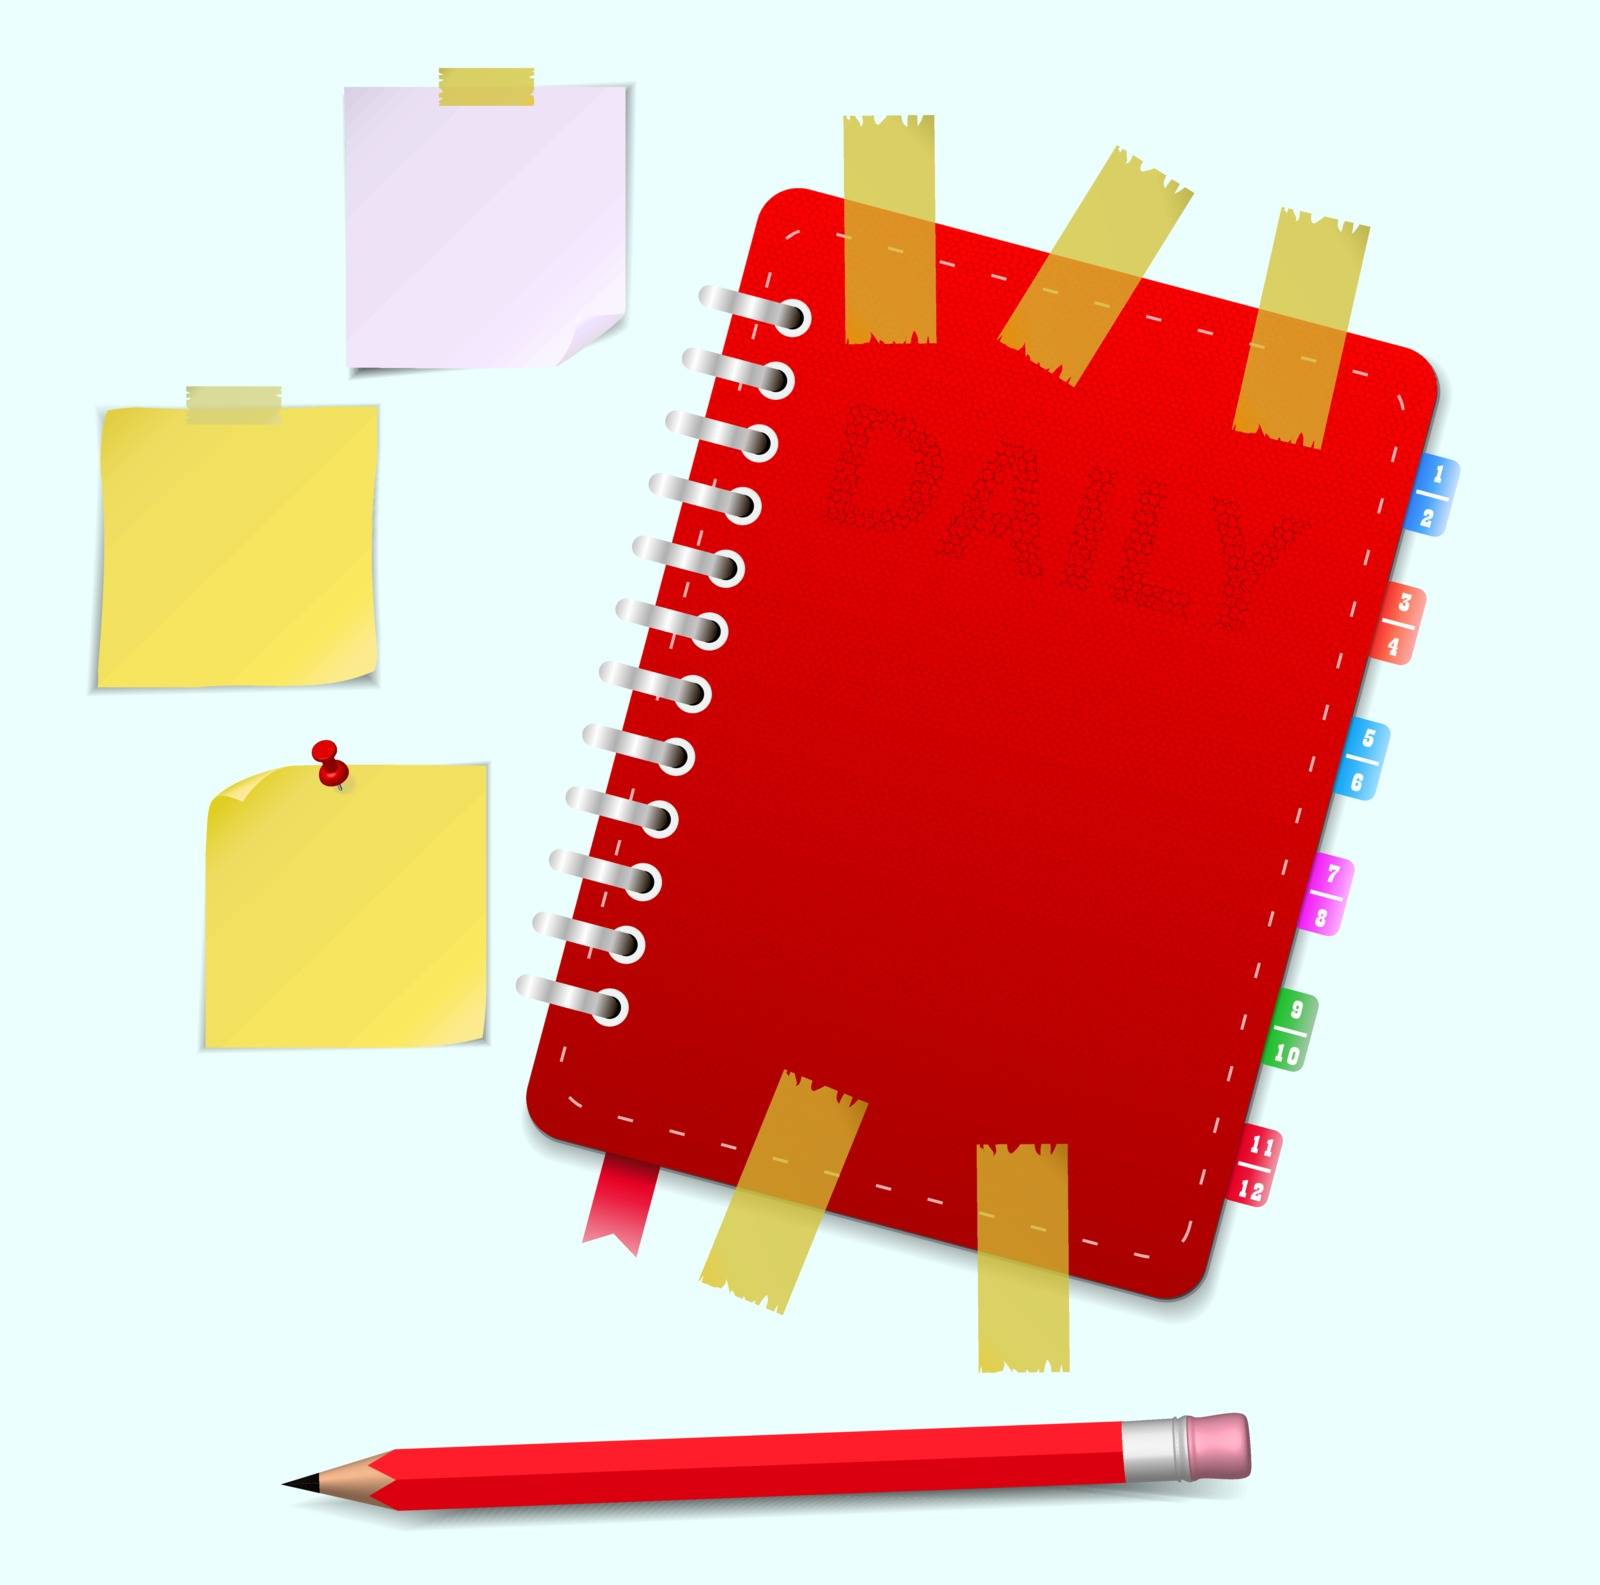 Leather notebook and pencil isolated on the white. Vector illustration